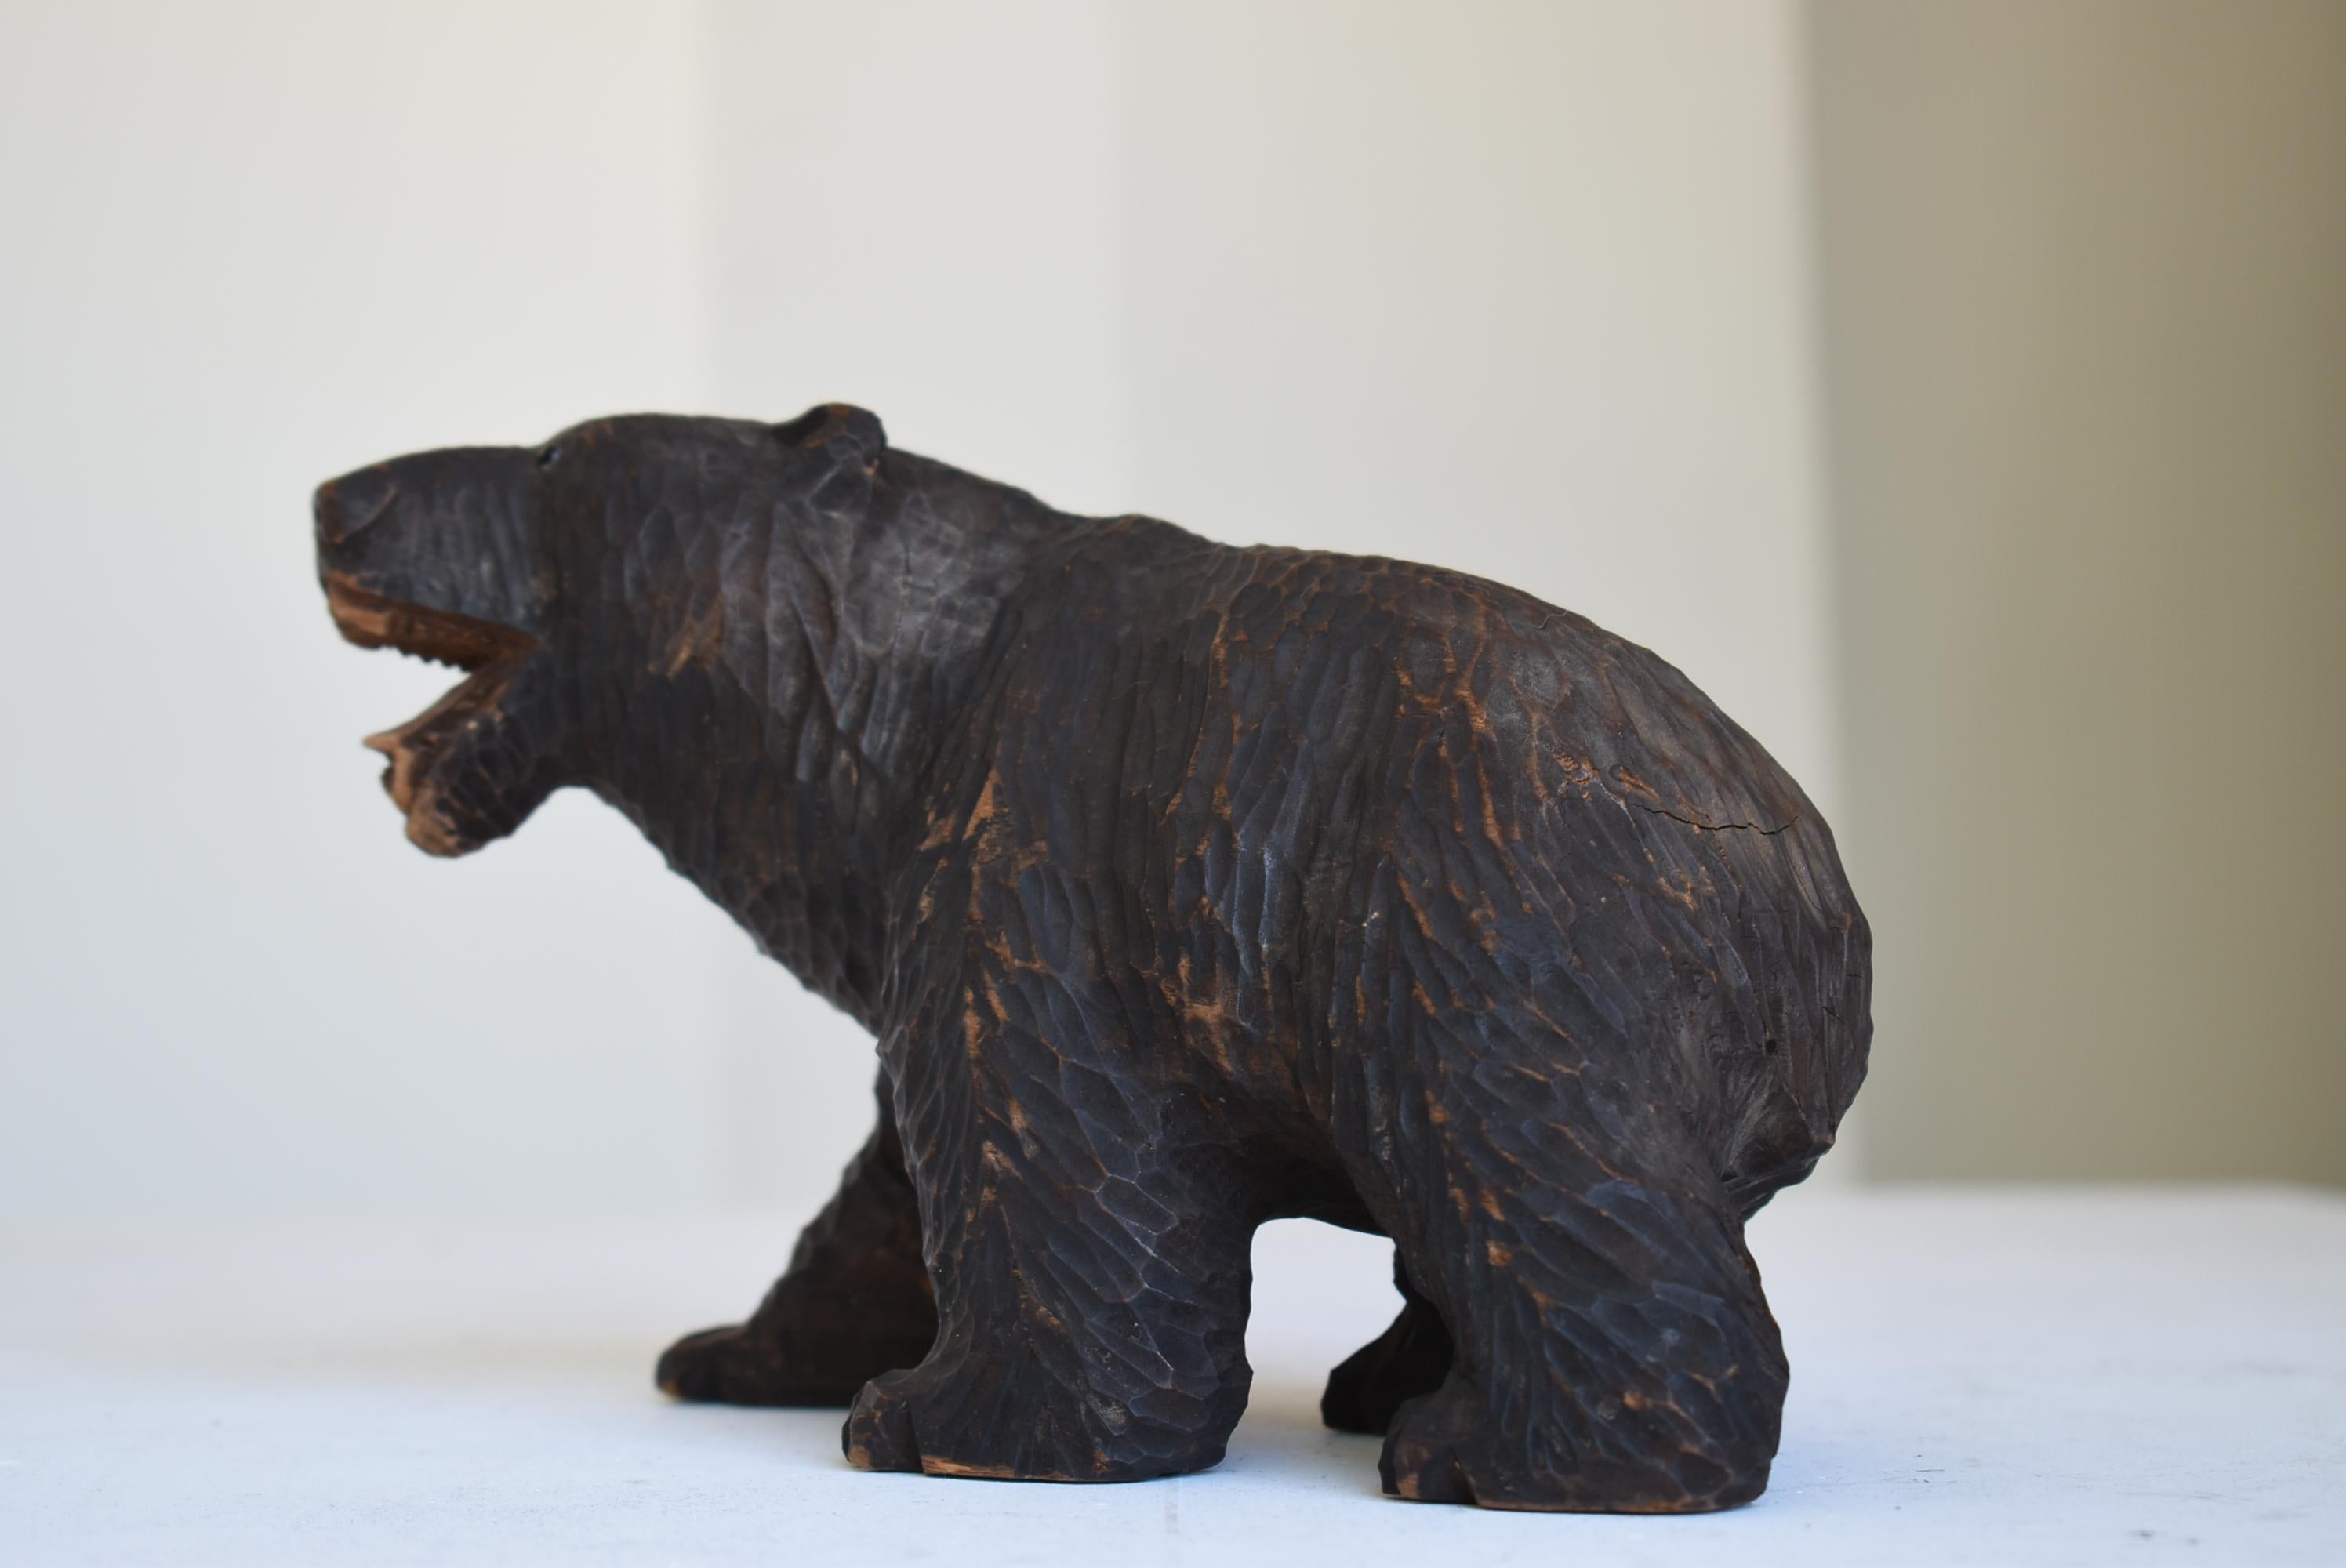 Japanese Old Wood Carving Bear 1930s-1950s/Vintage Figurine Sculpture Folk Art In Good Condition For Sale In Sammu-shi, Chiba